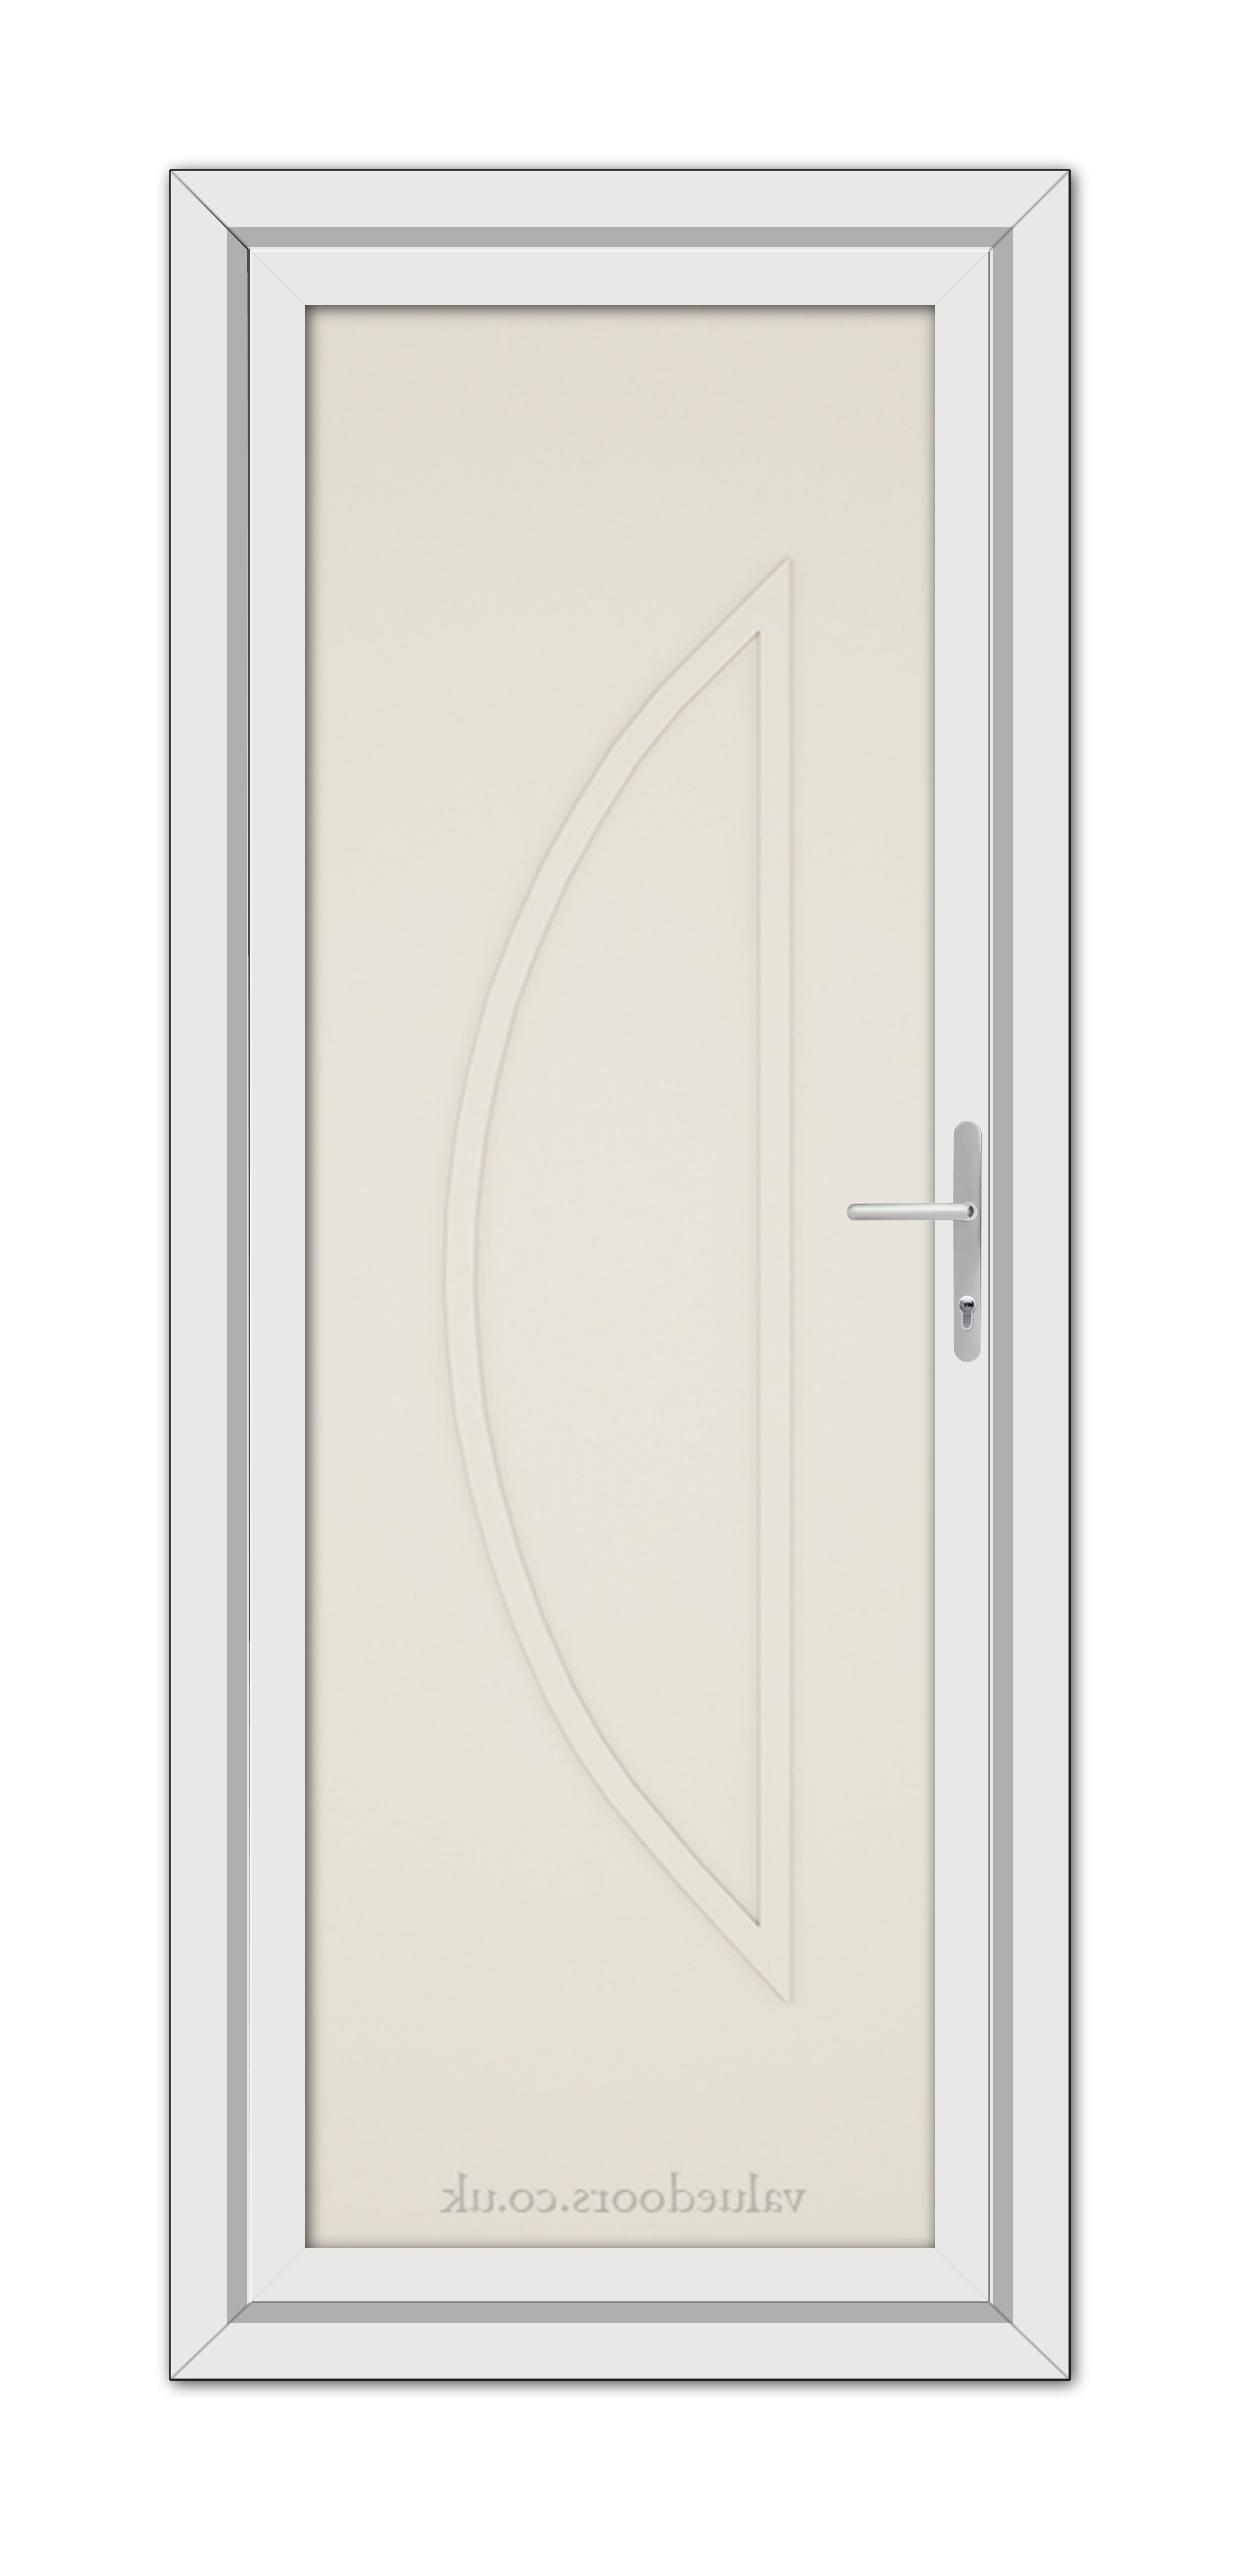 A vertical image of a Cream Modern 5051 Solid uPVC Door with a semi-circular raised panel design and a metallic handle, set within a white frame.